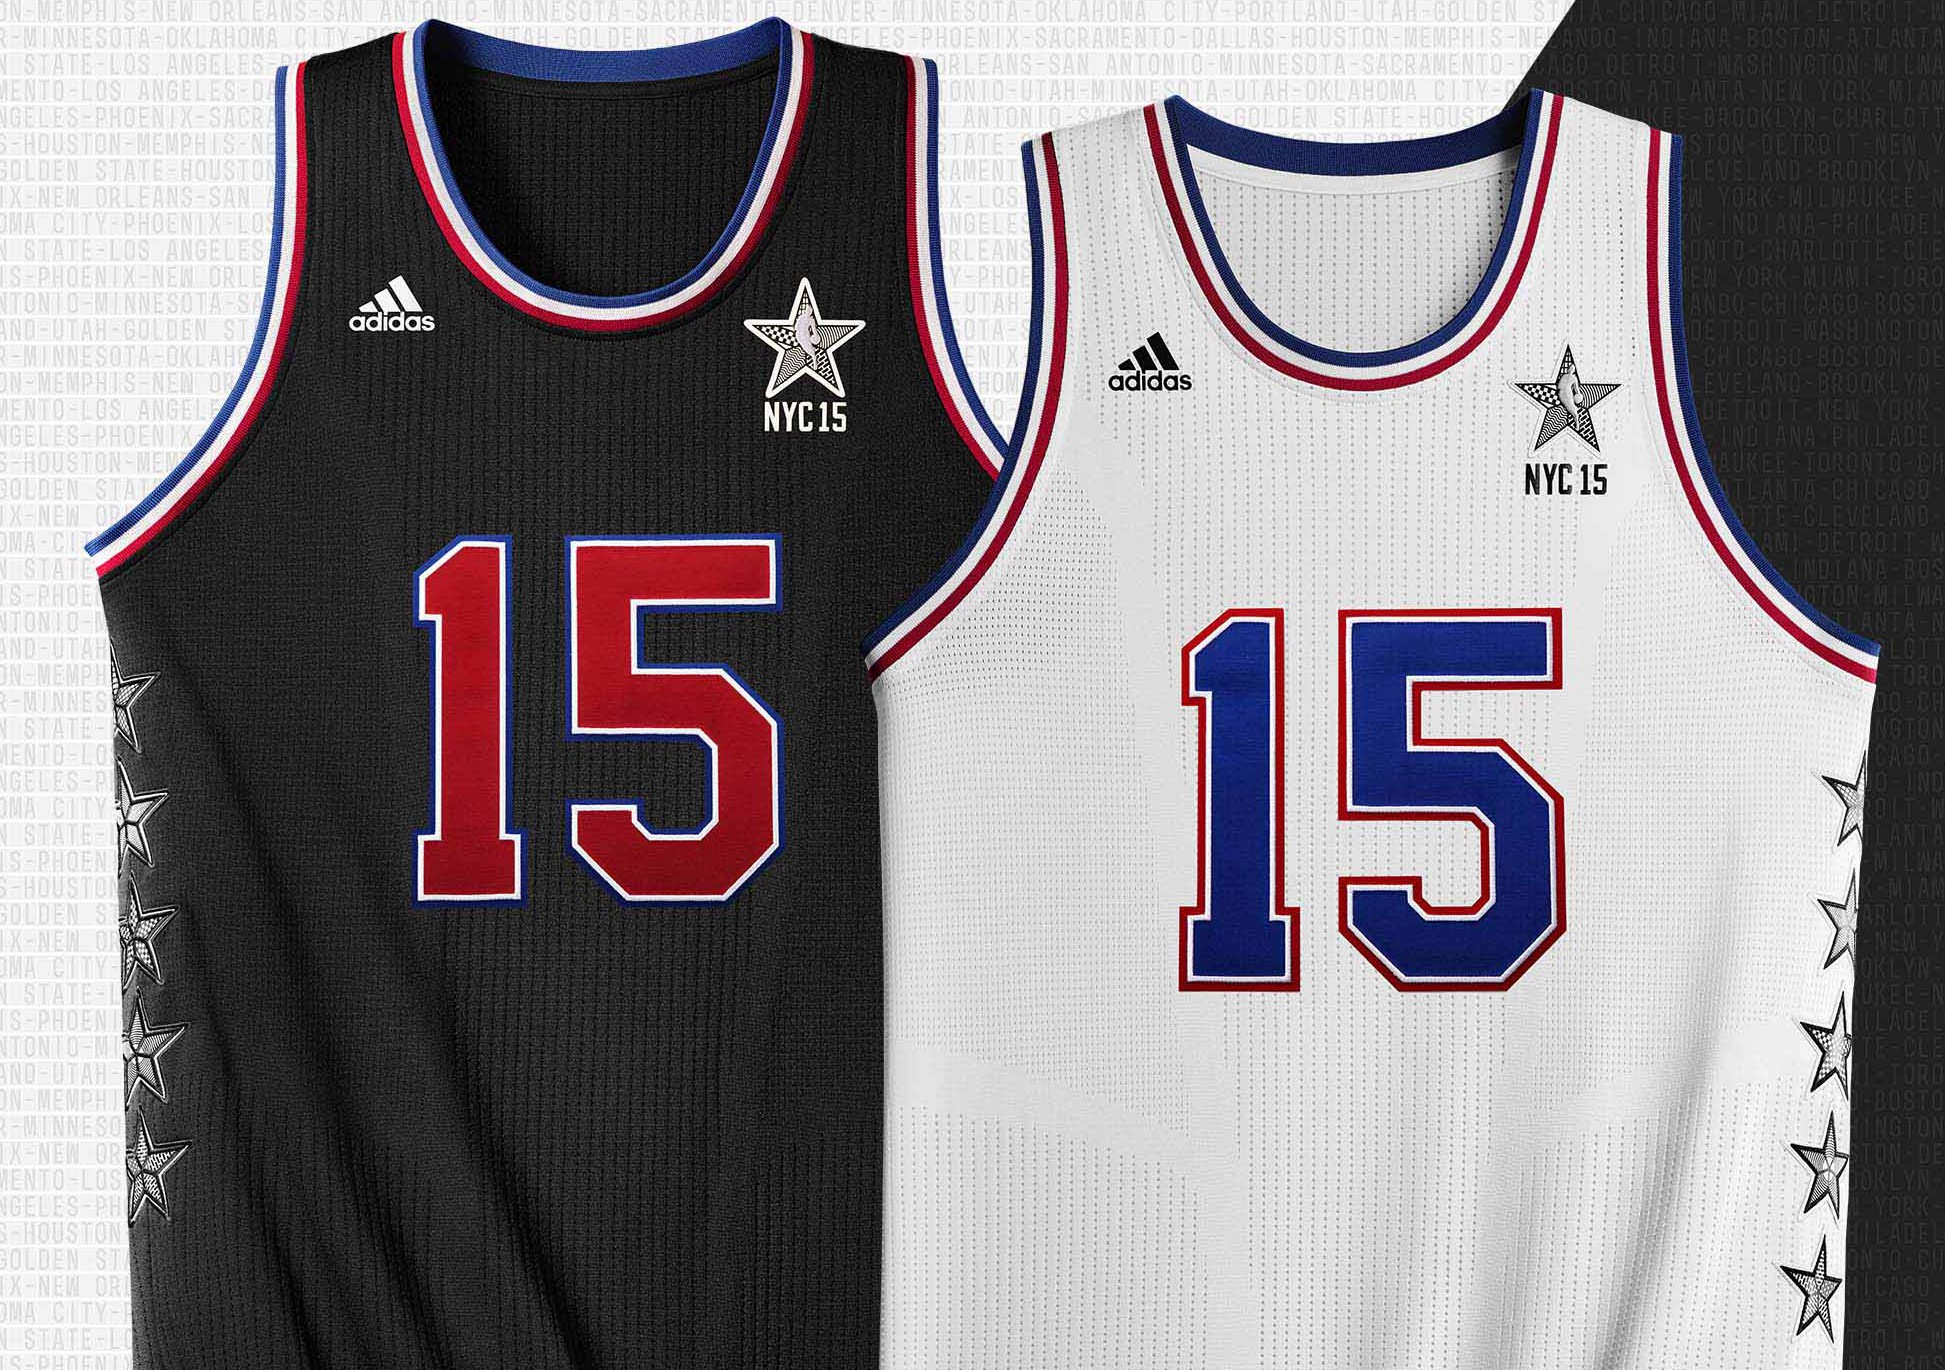 The 2015 NBA All-Star Game uniforms pay homage to New York